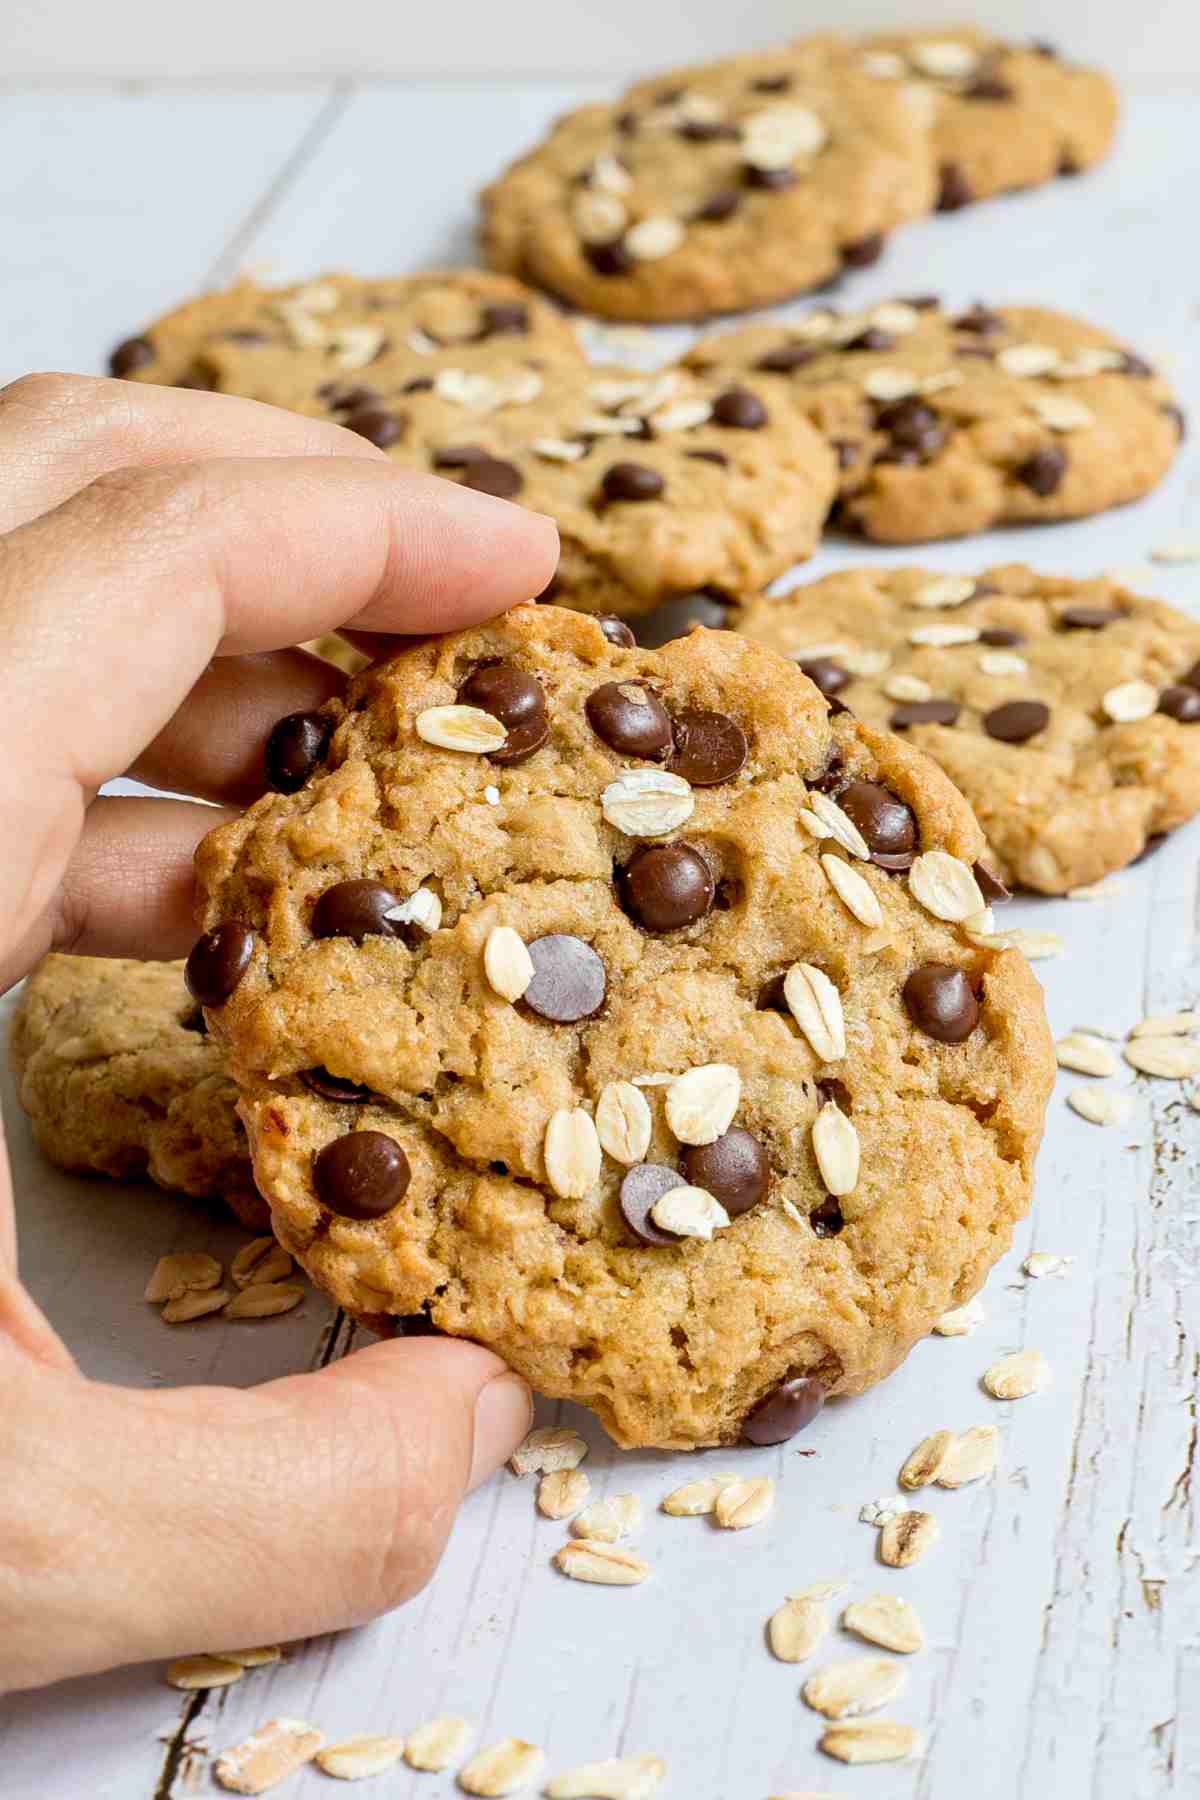 Lots of cookies with oats and chocolate chips on a wooden surface. More oats are sprinkled around them. A hand is lifting one cookie up.